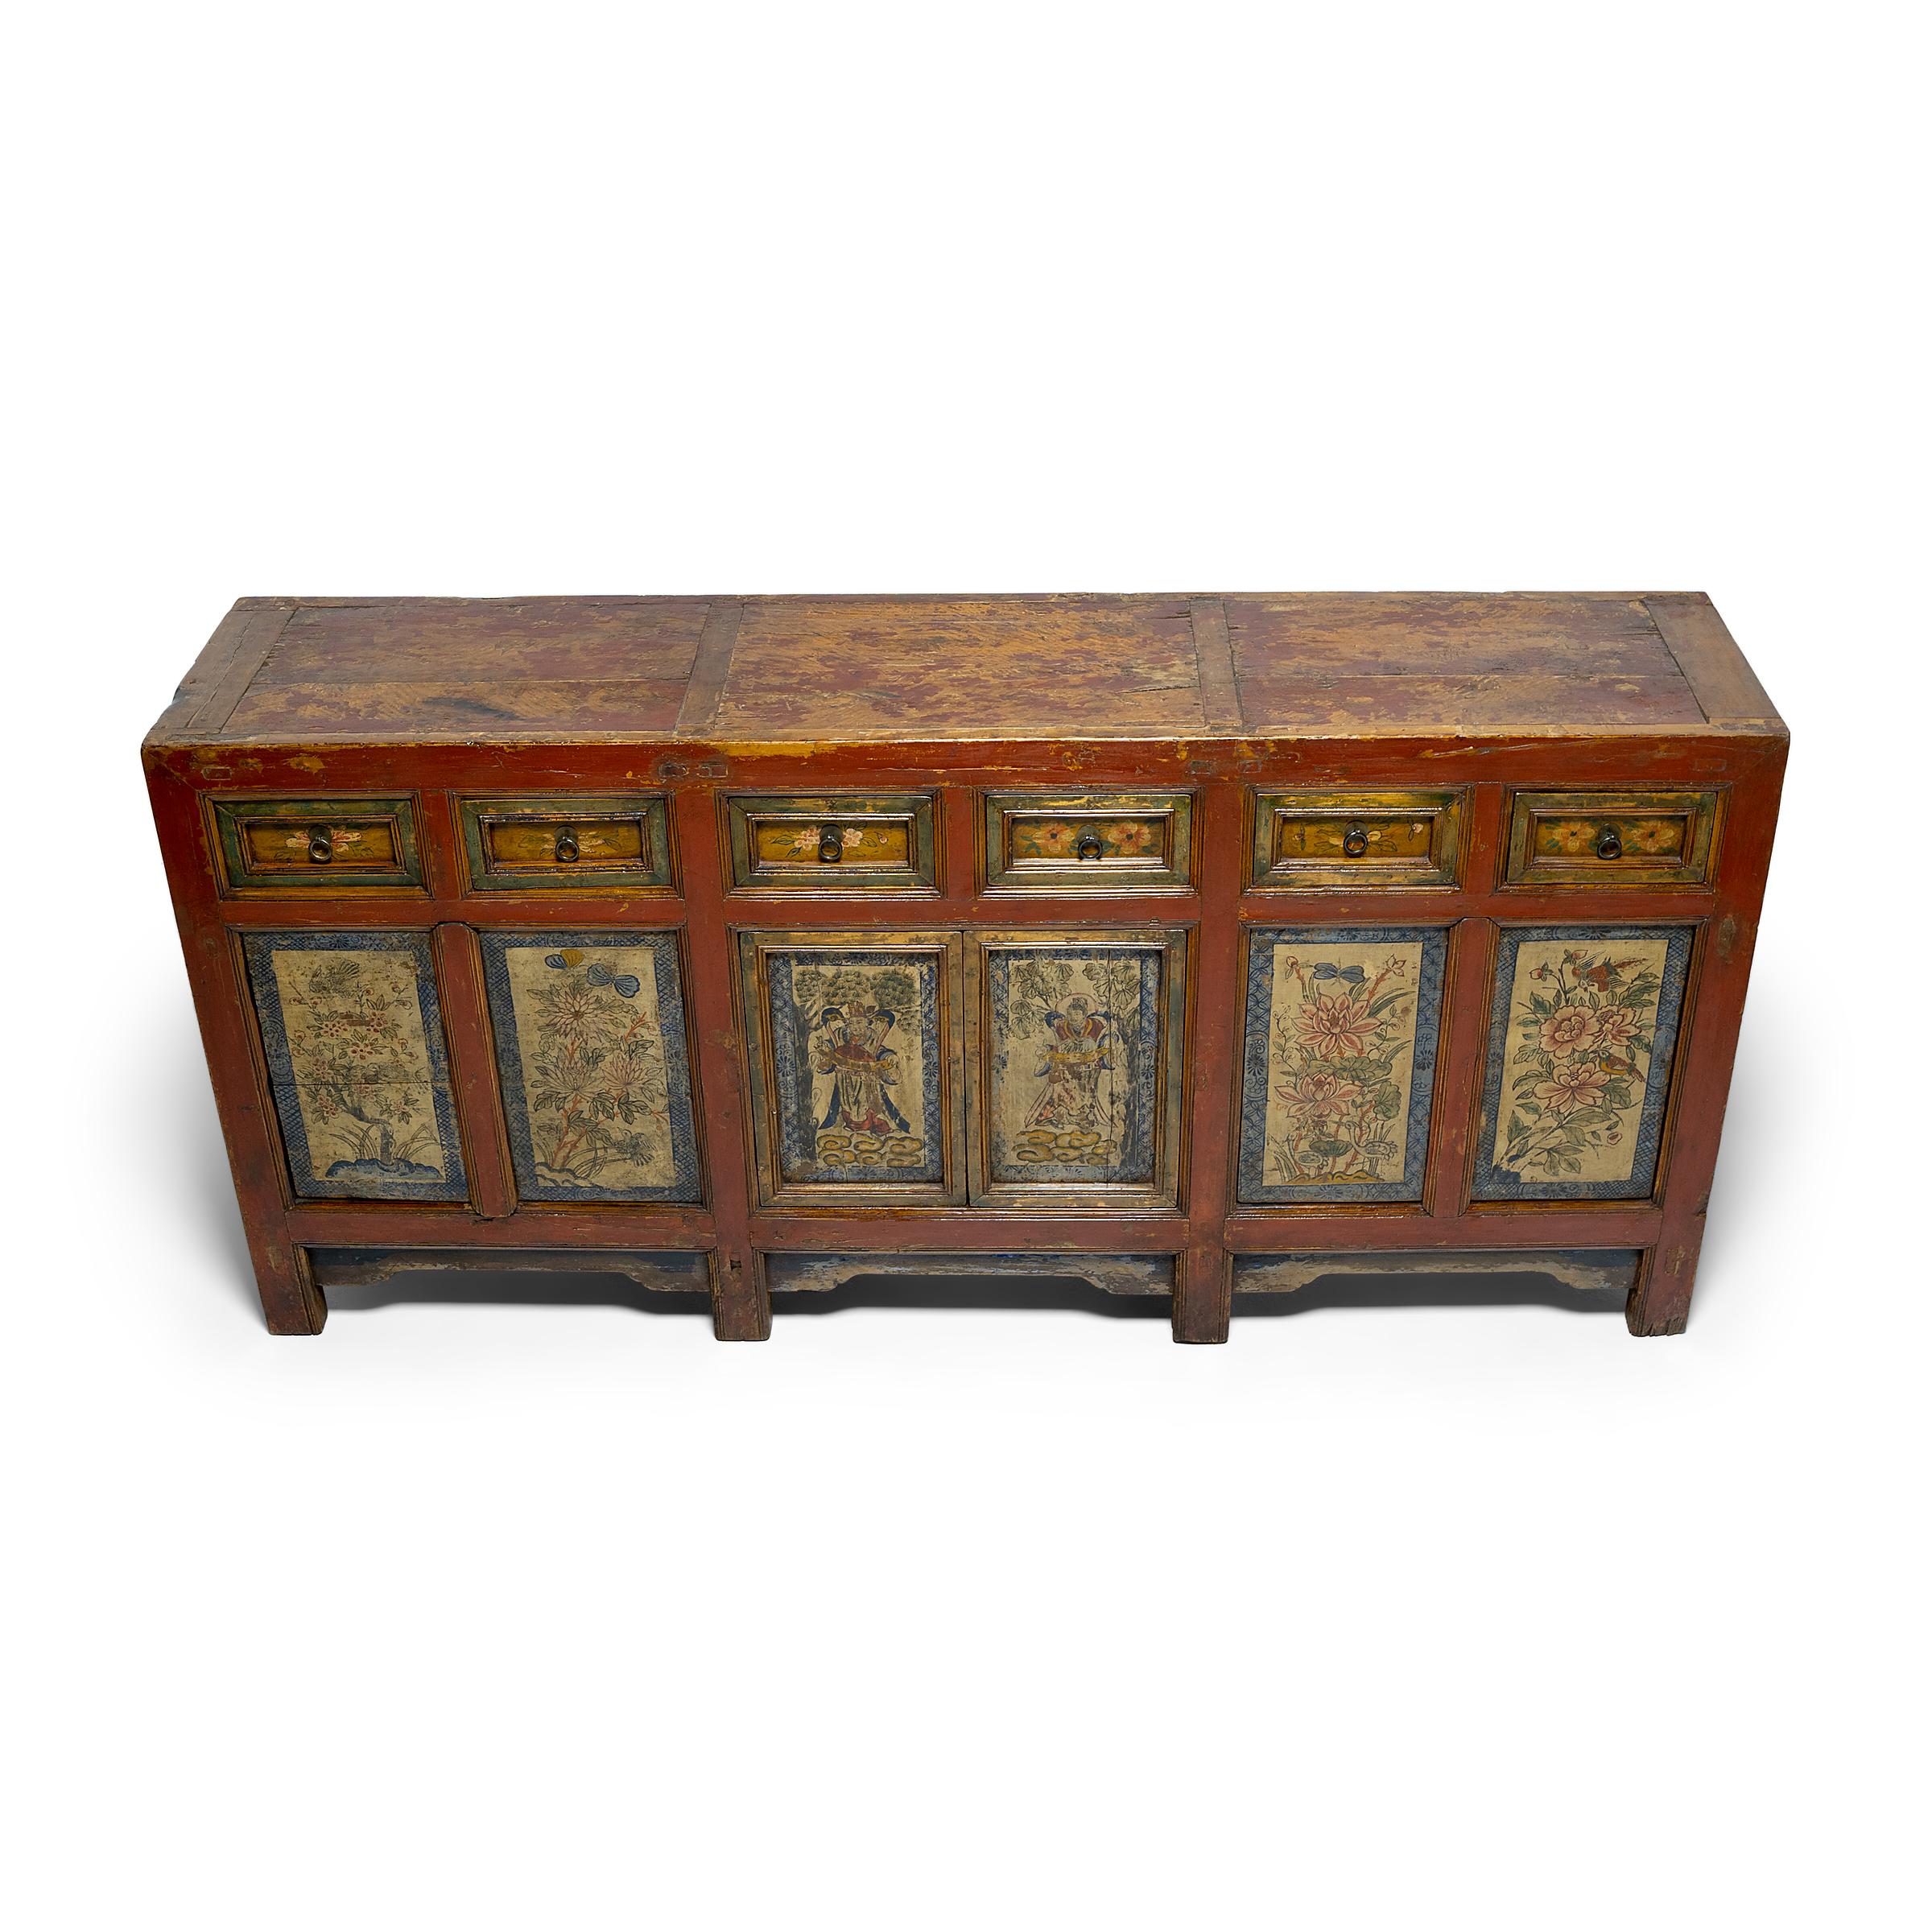 Hand-Painted Chinese Provincial Four Seasons Coffer, c. 1900